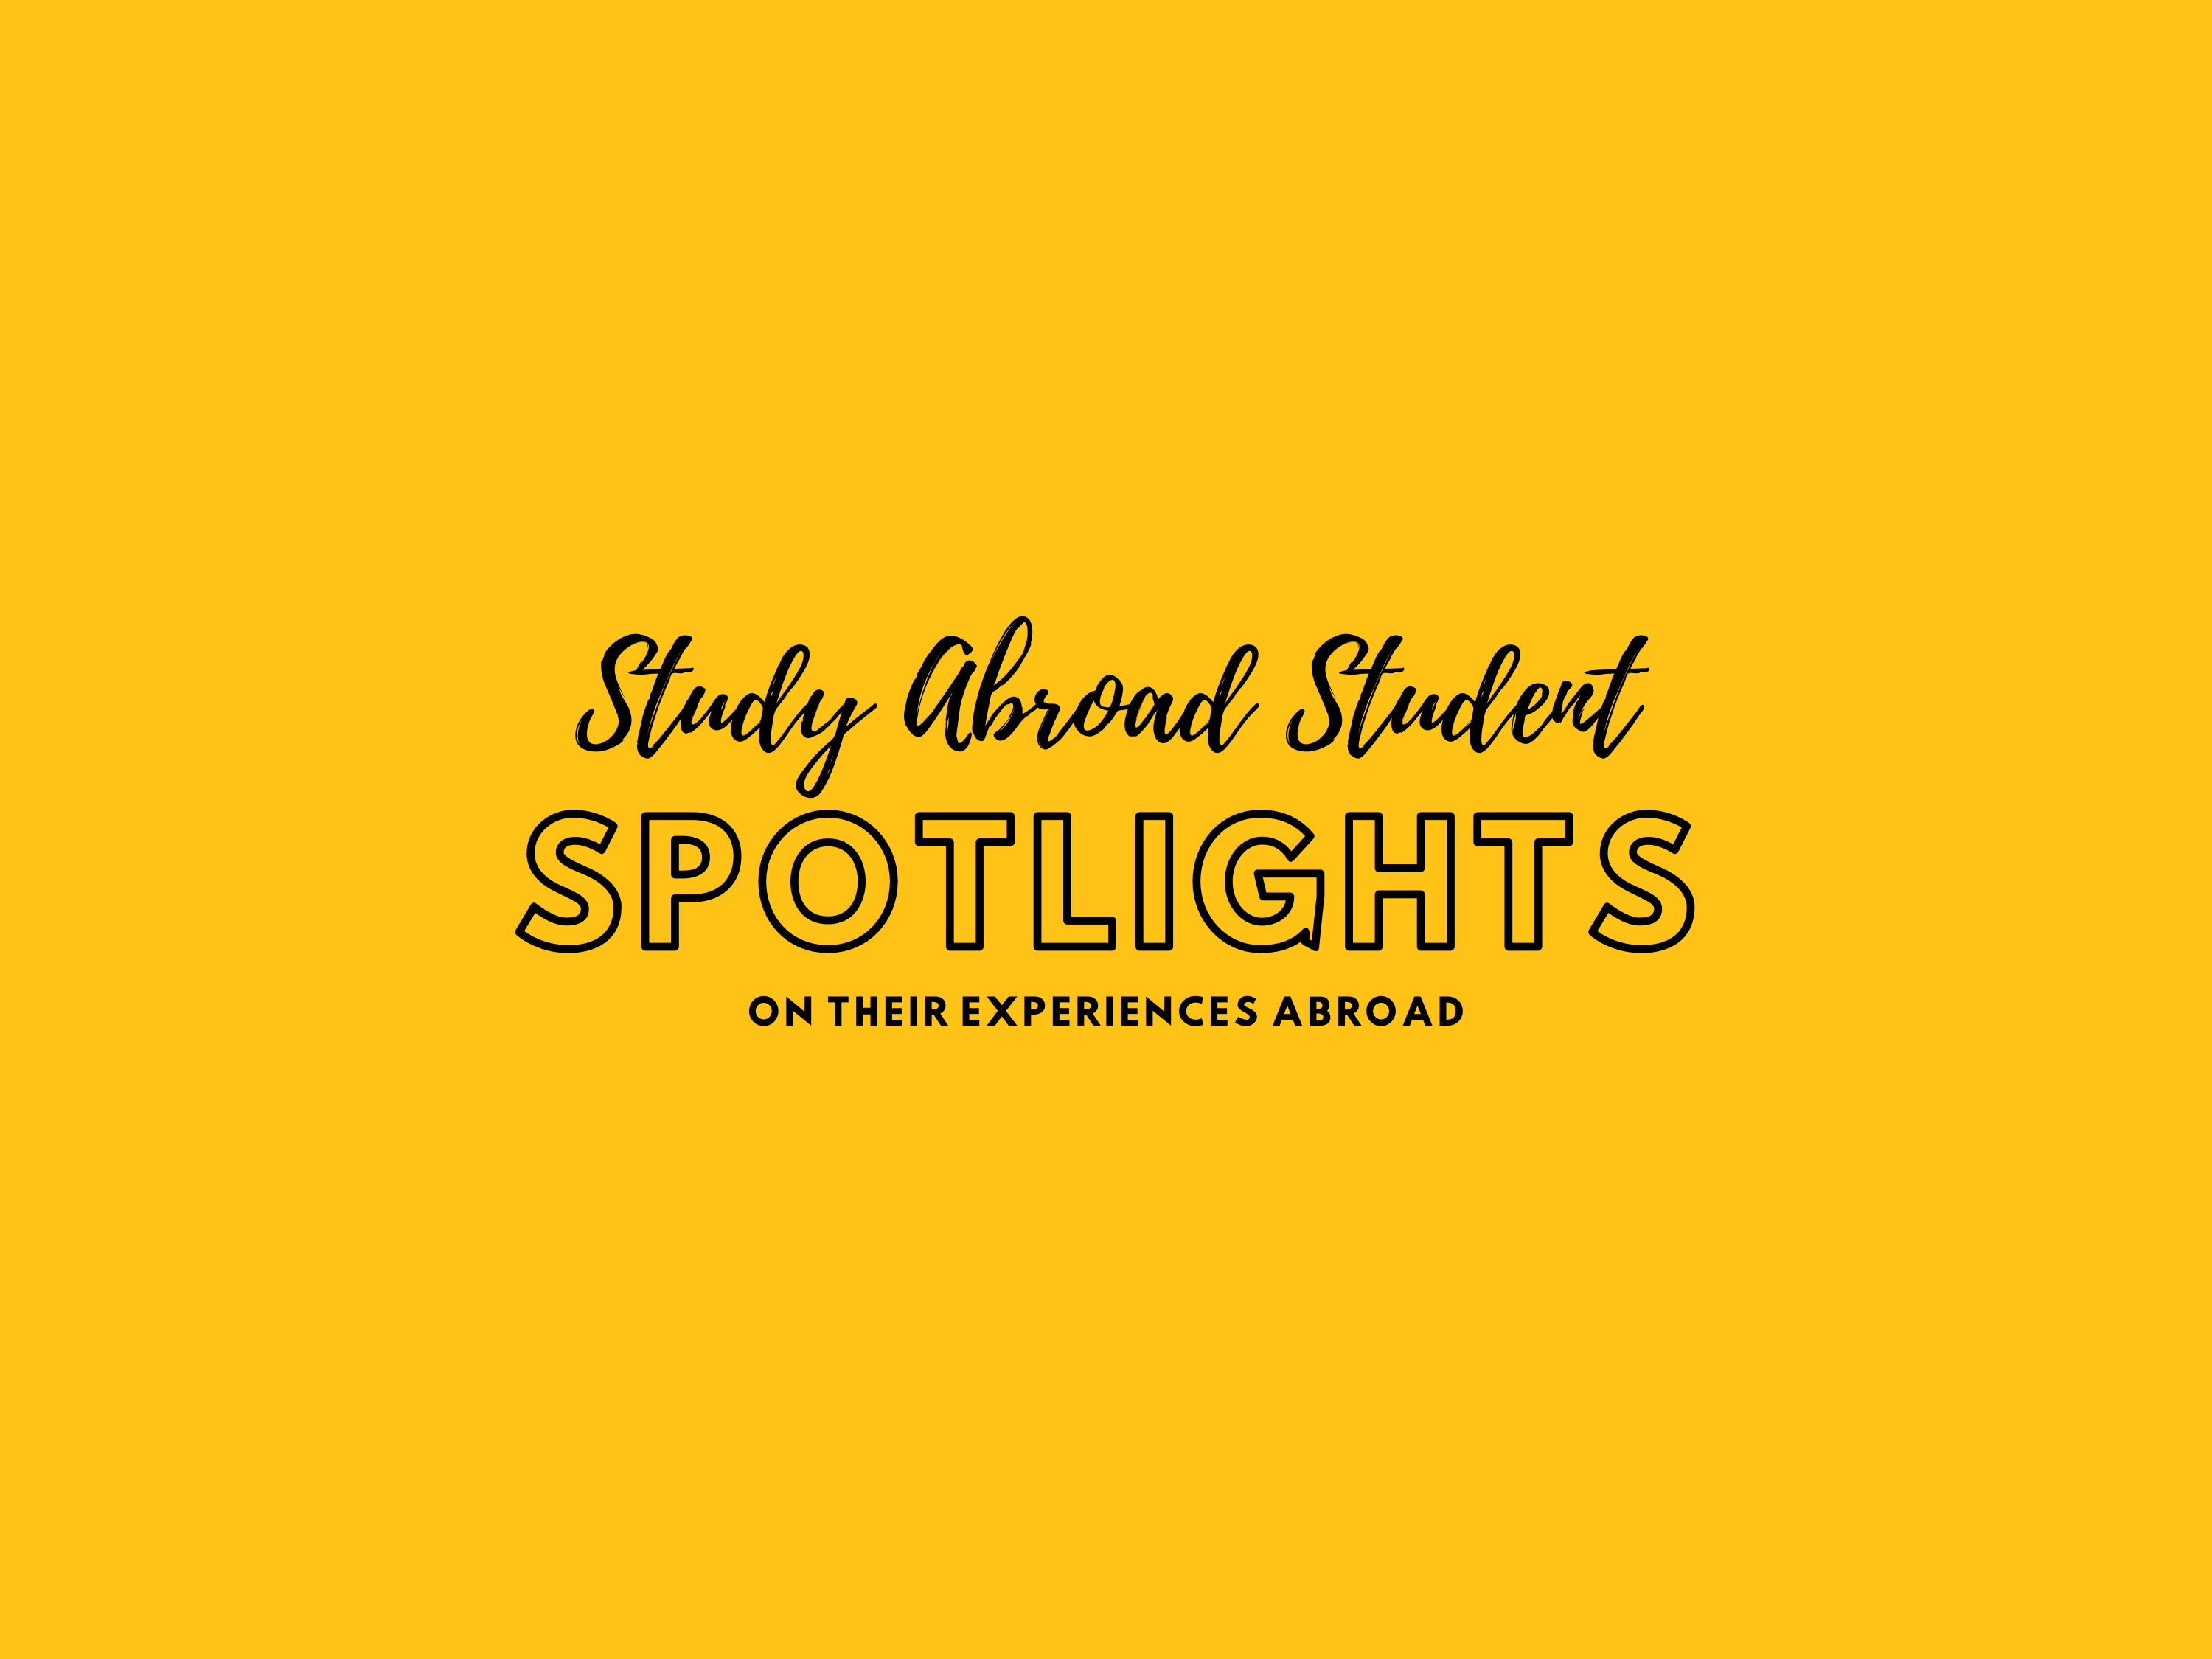 Study Abroad Student Spotlights on their experiences abroad